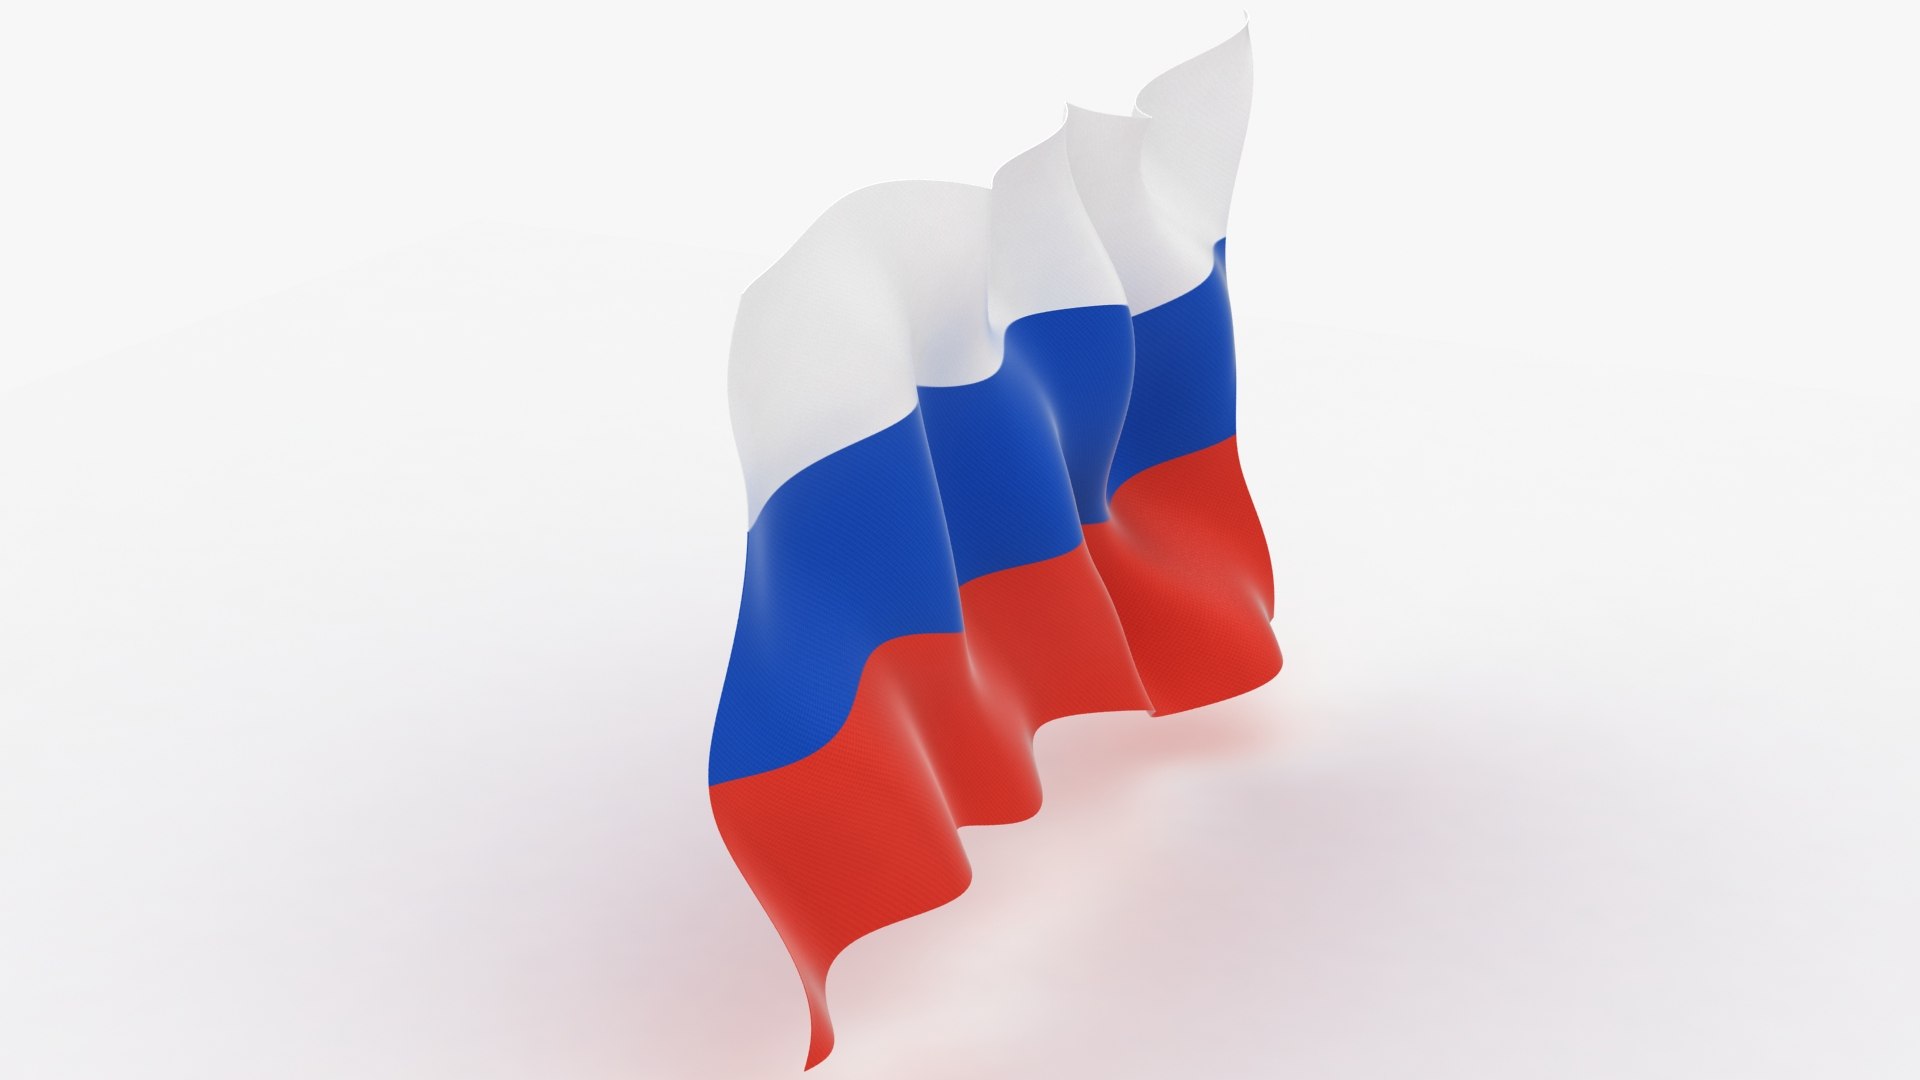 211,127 Russian Flag Images, Stock Photos, 3D objects, & Vectors